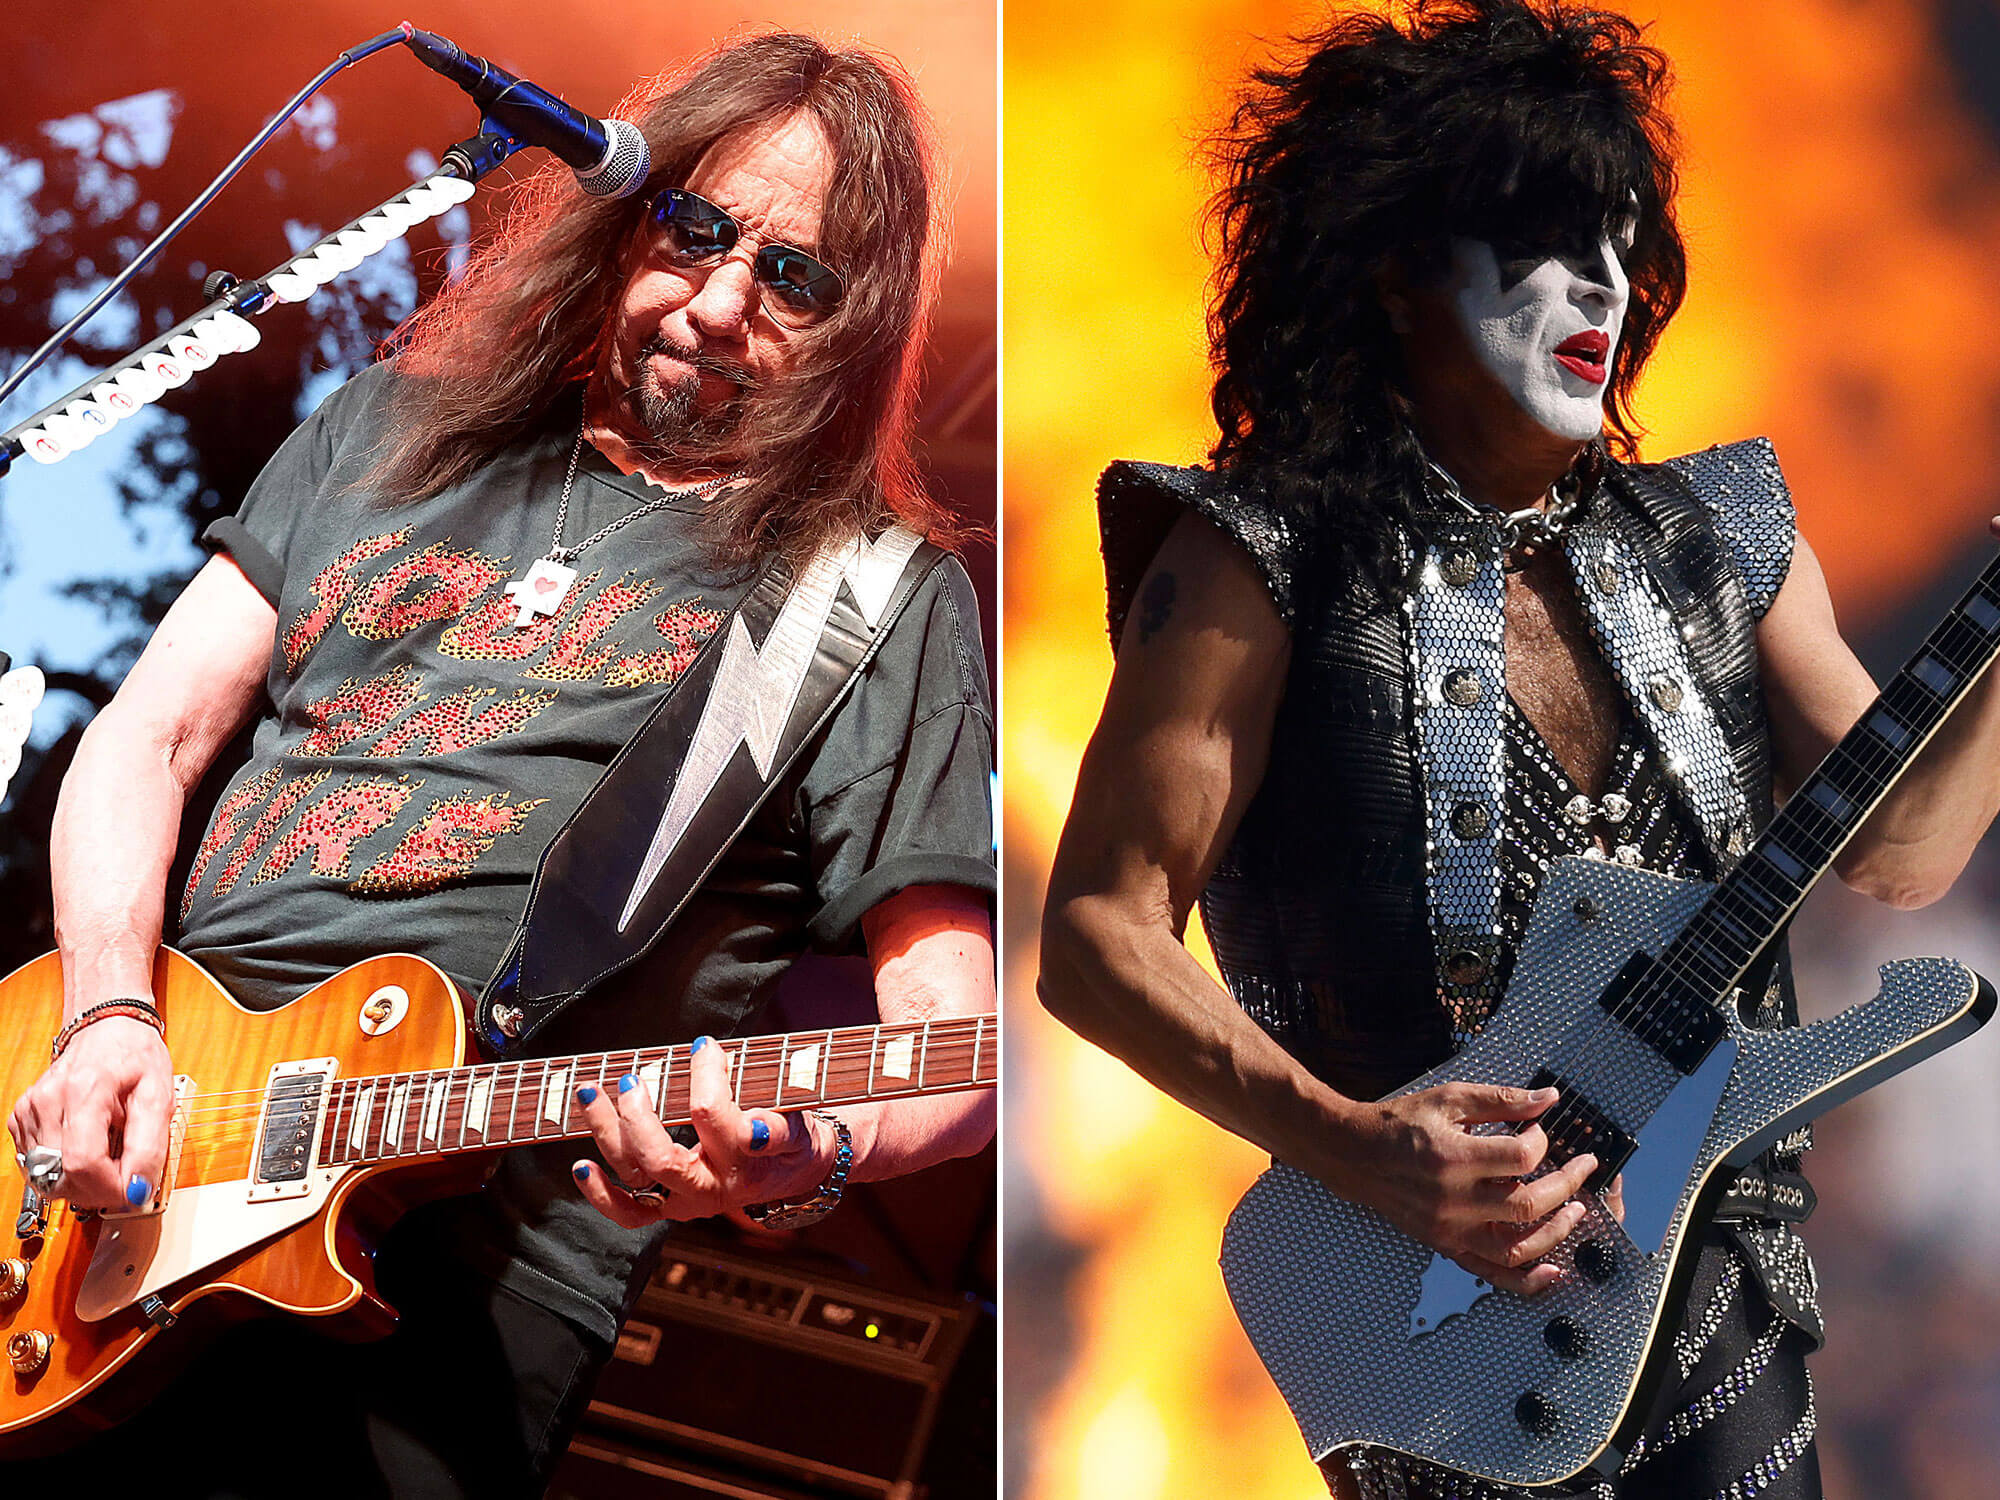 [L-R] Ace Frehley and Paul Stanley